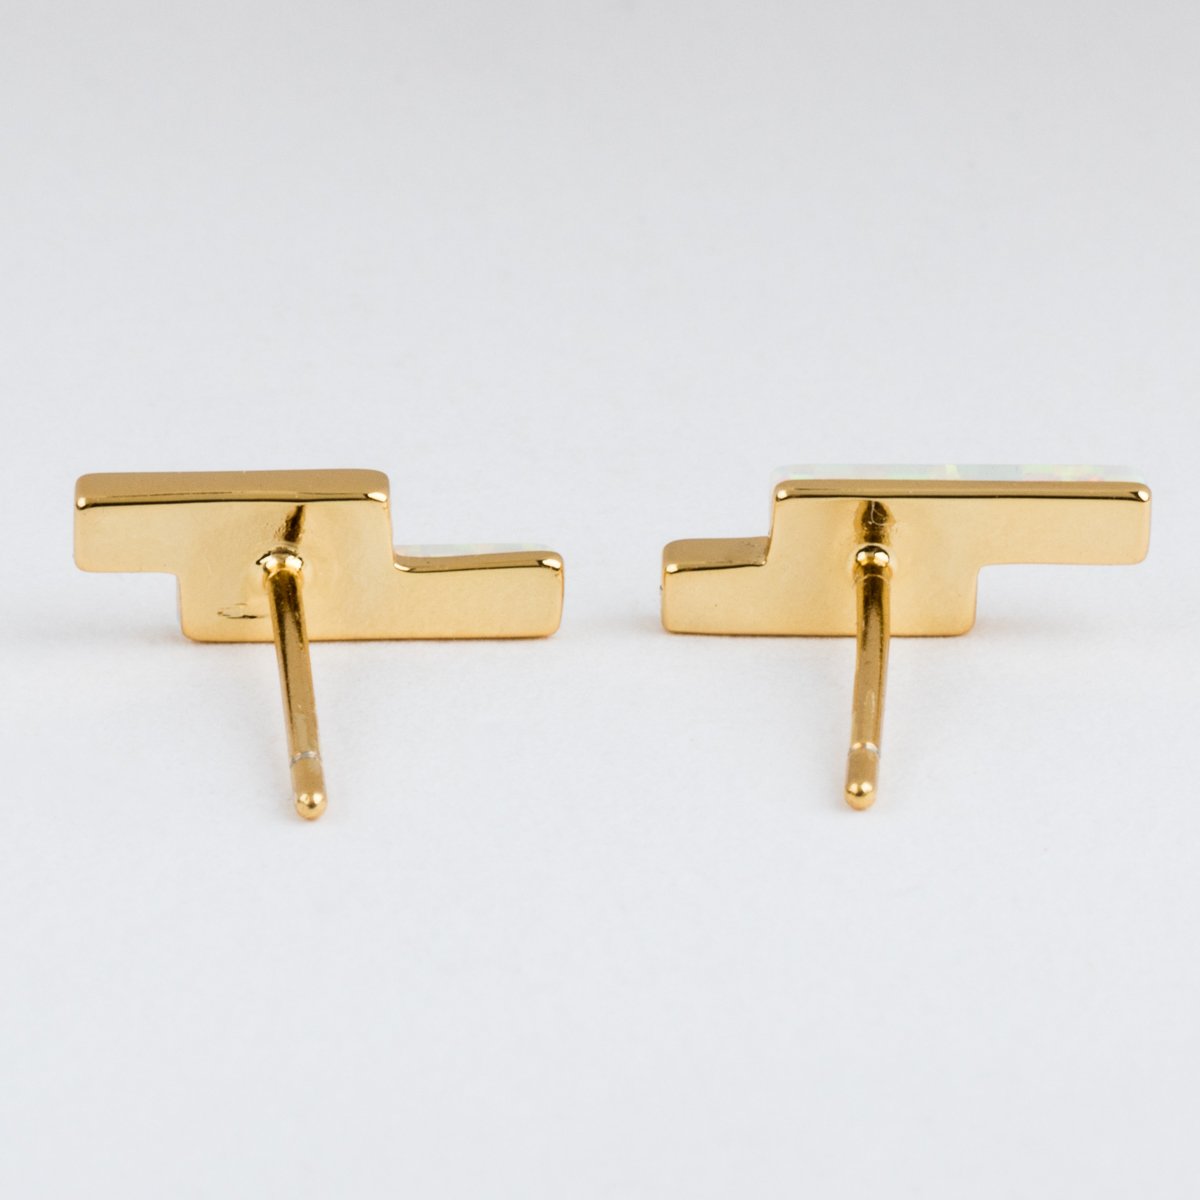 Local Eclectic Gold Mod Bar Gem Stud Earrings with Opal 